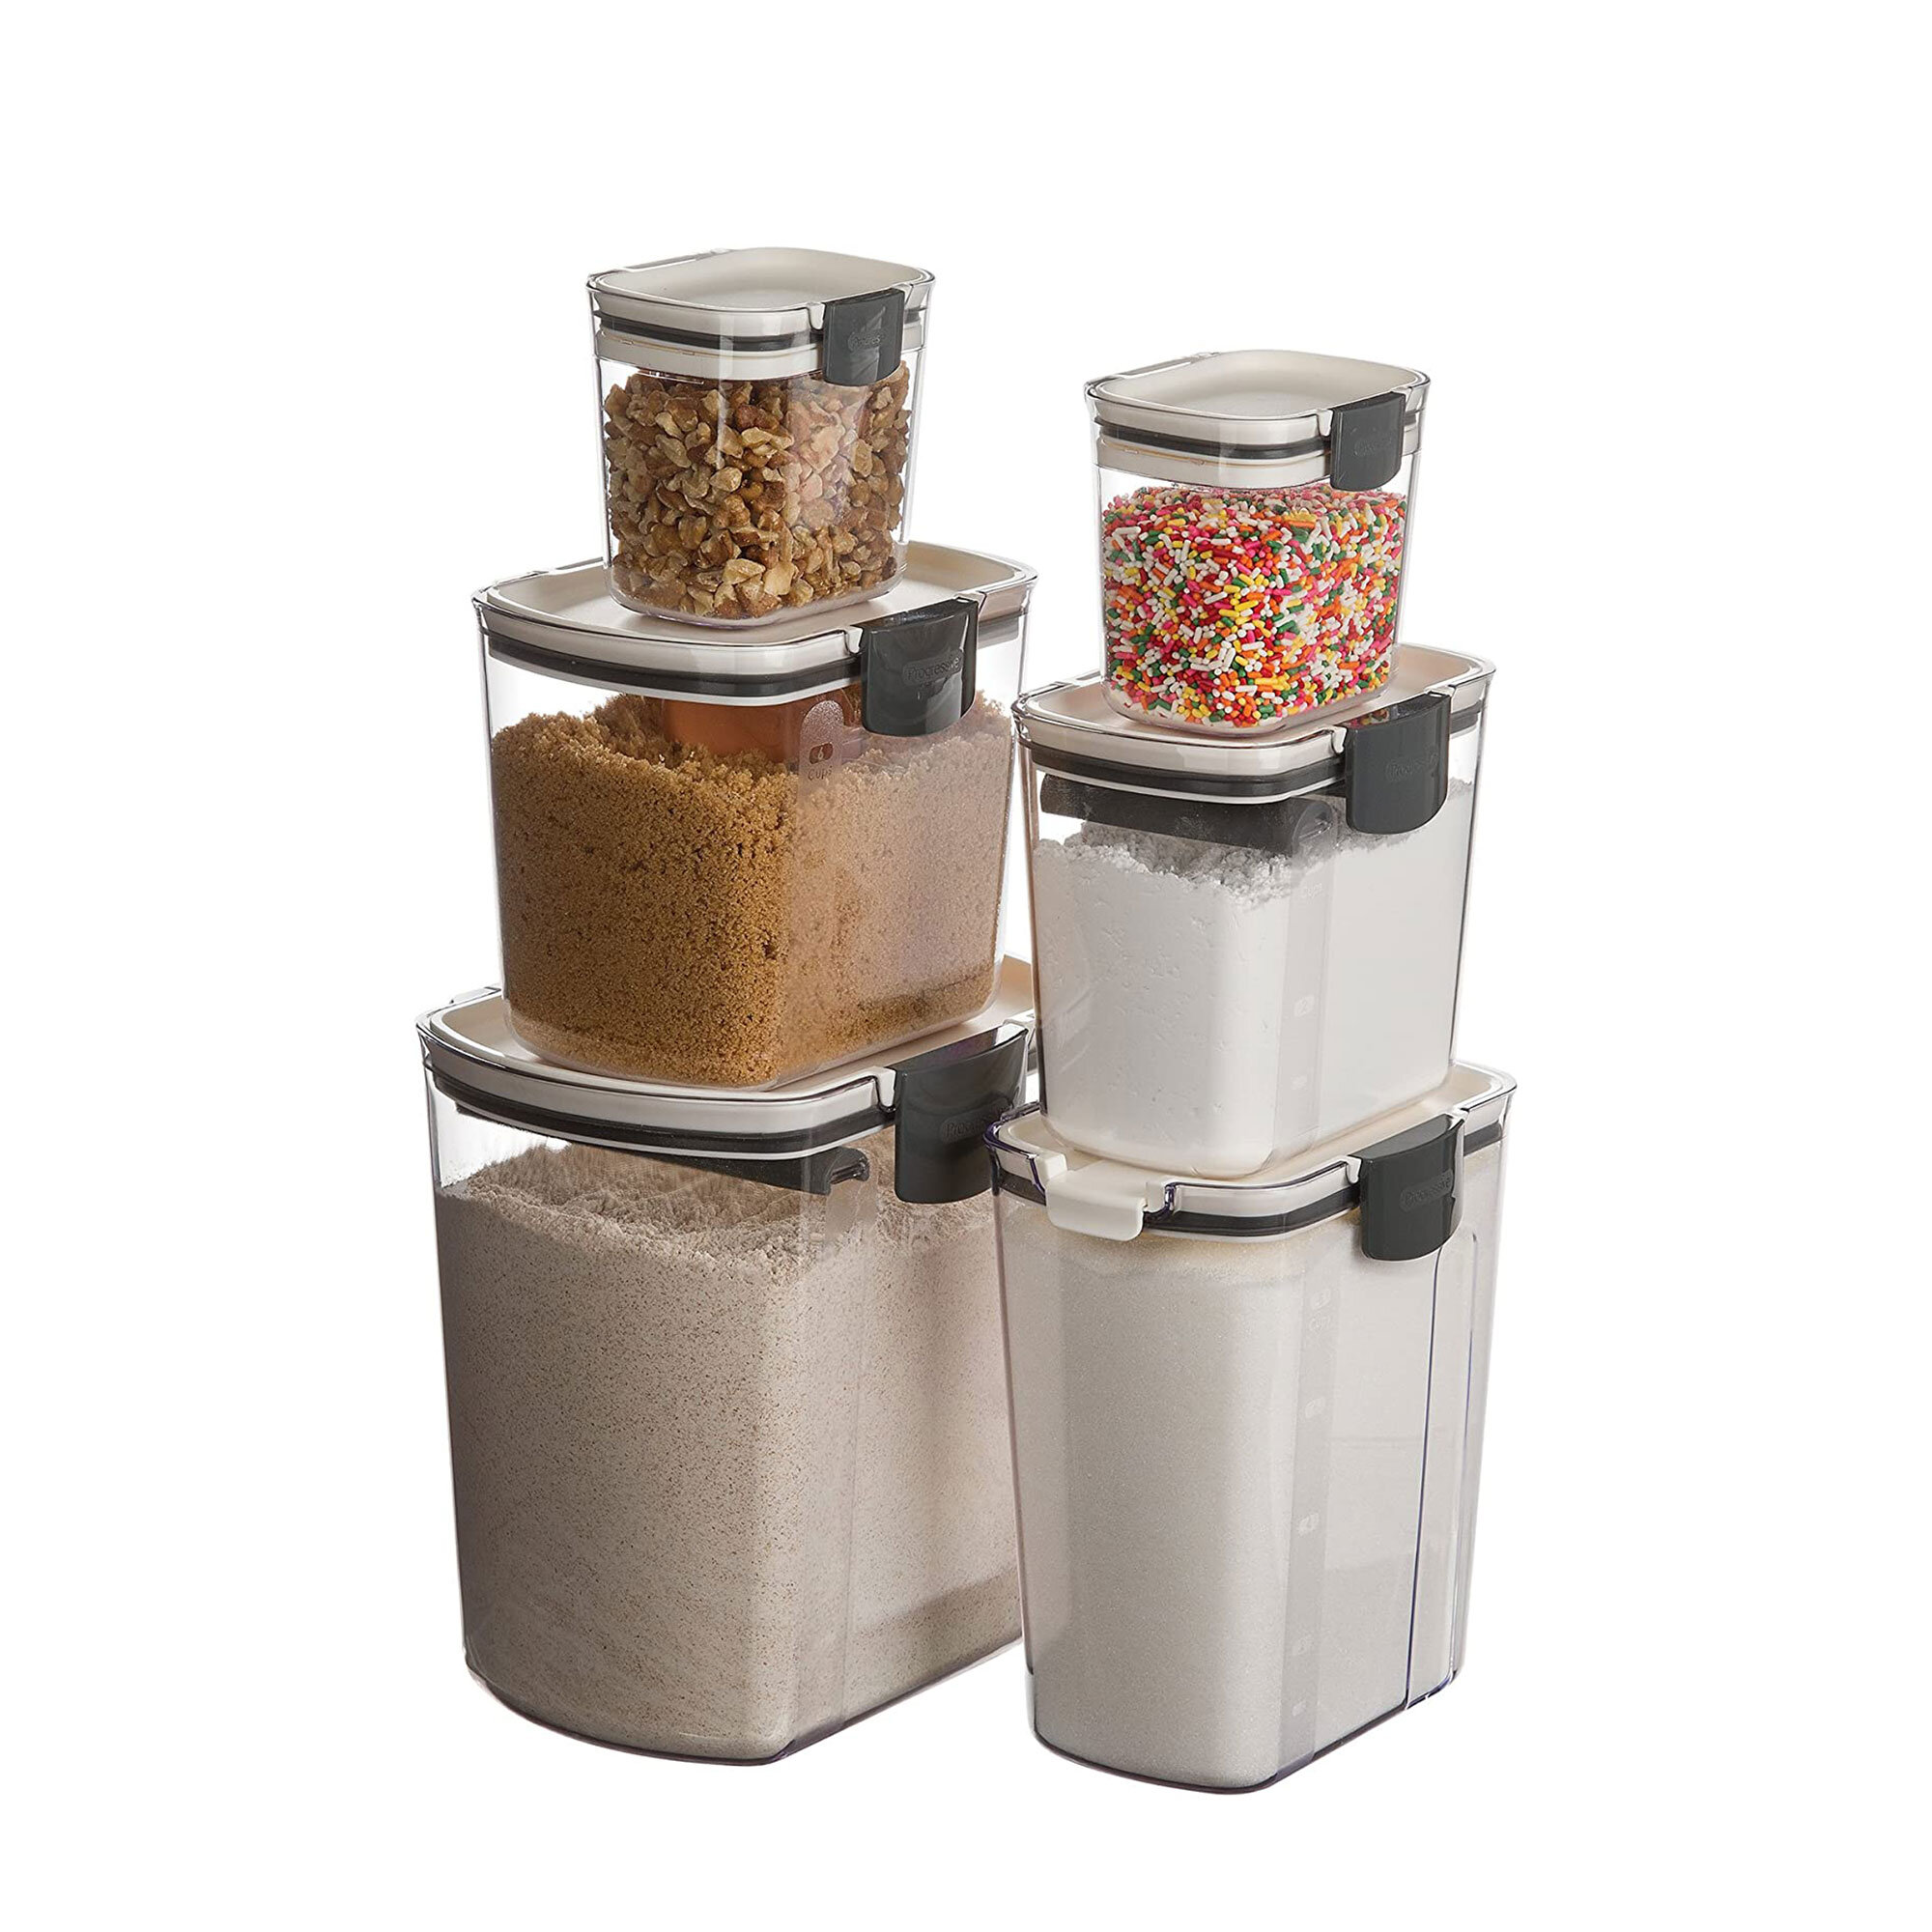 ProKeeper 14-Cup Cereal Storage Container